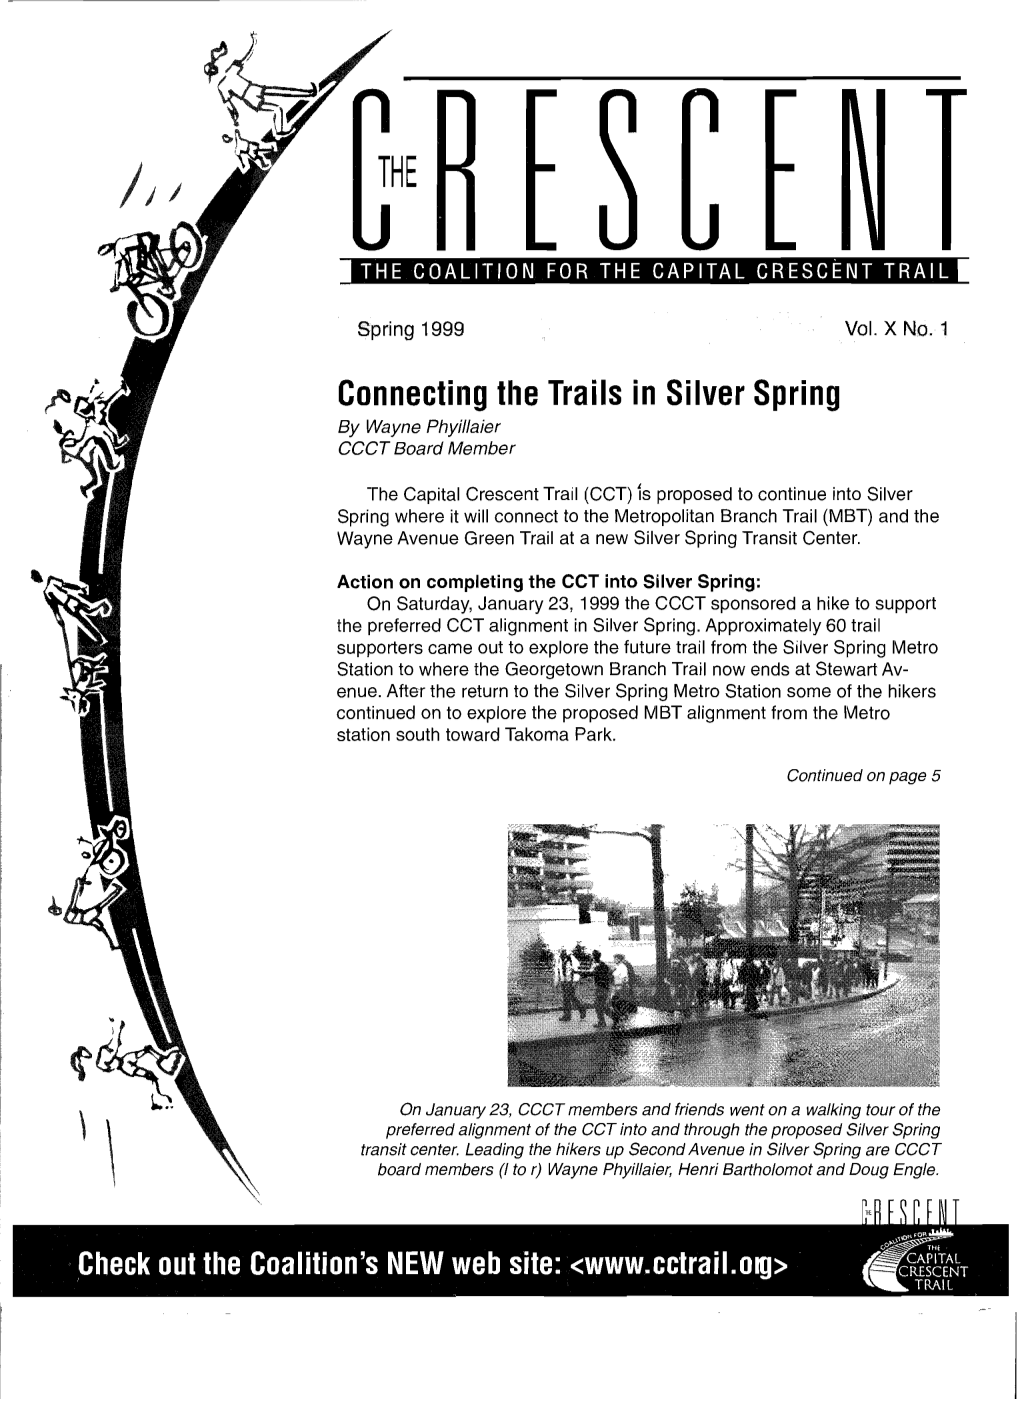 Connecting the Trails in Silver Spring 1 by Wayne Phyillaier CCCT Board Member